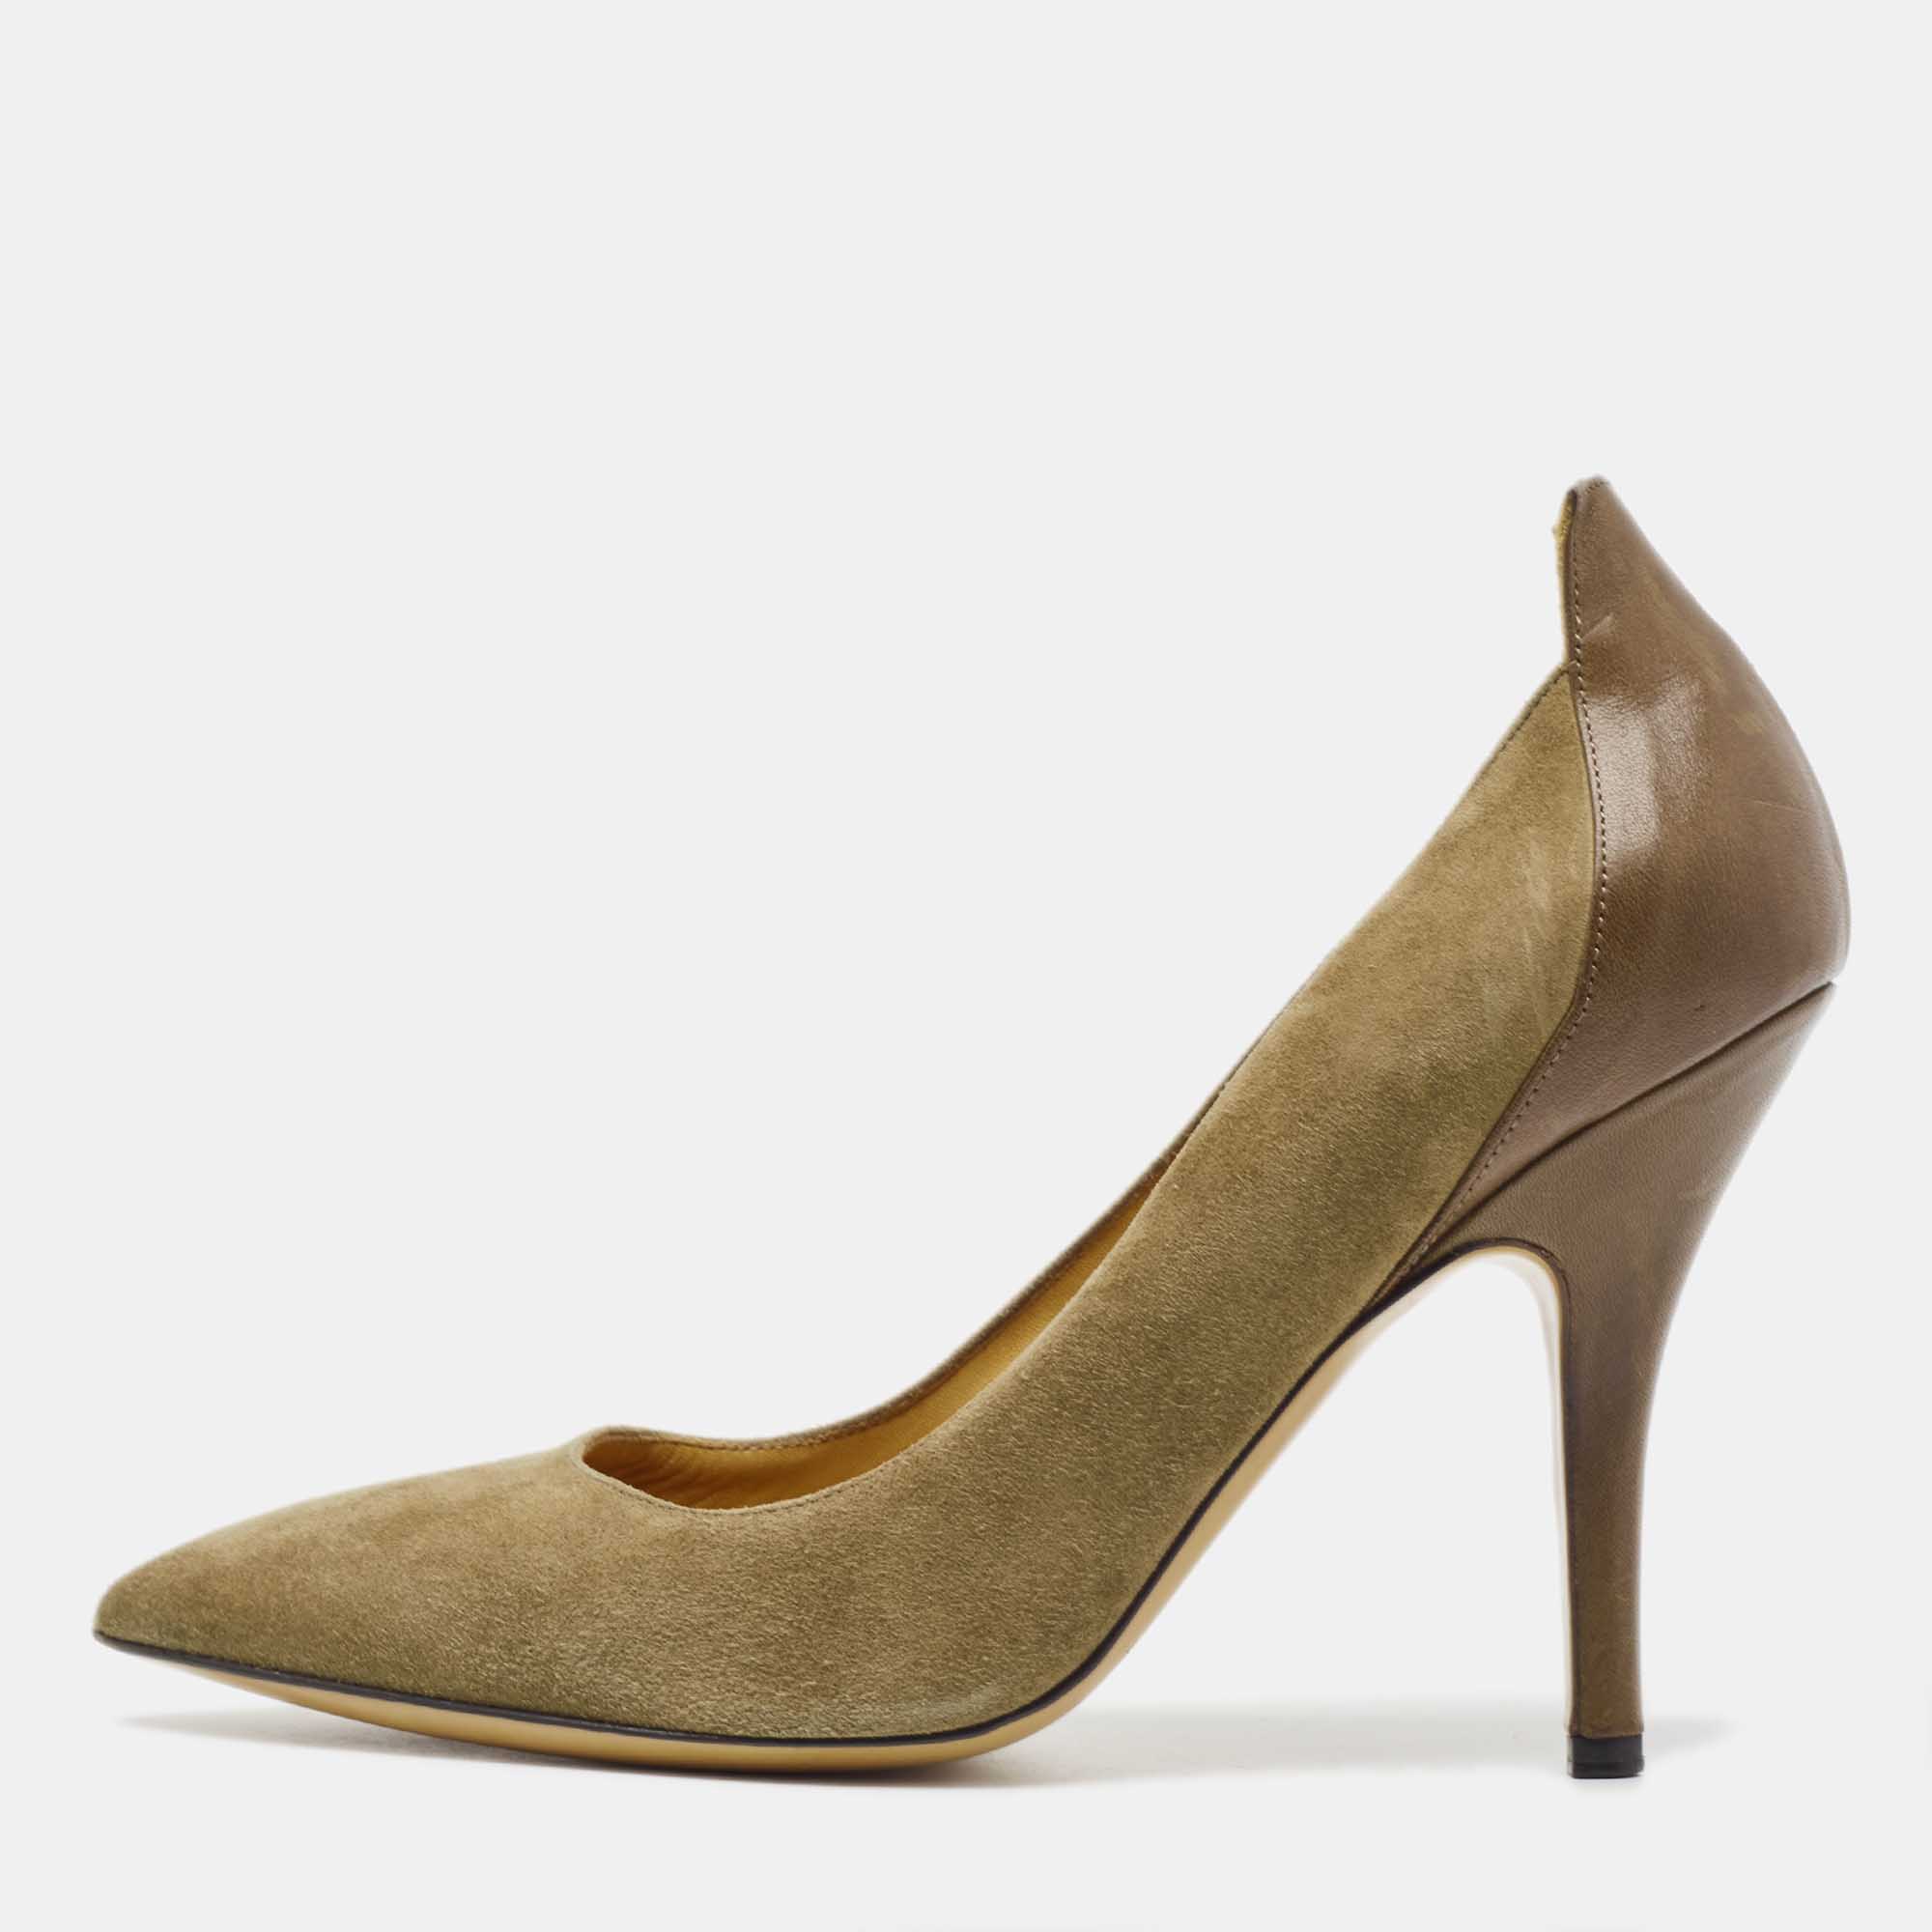 Isabel Marant Olive Green Suede And Leather Pointed Toe Pumps Size 38